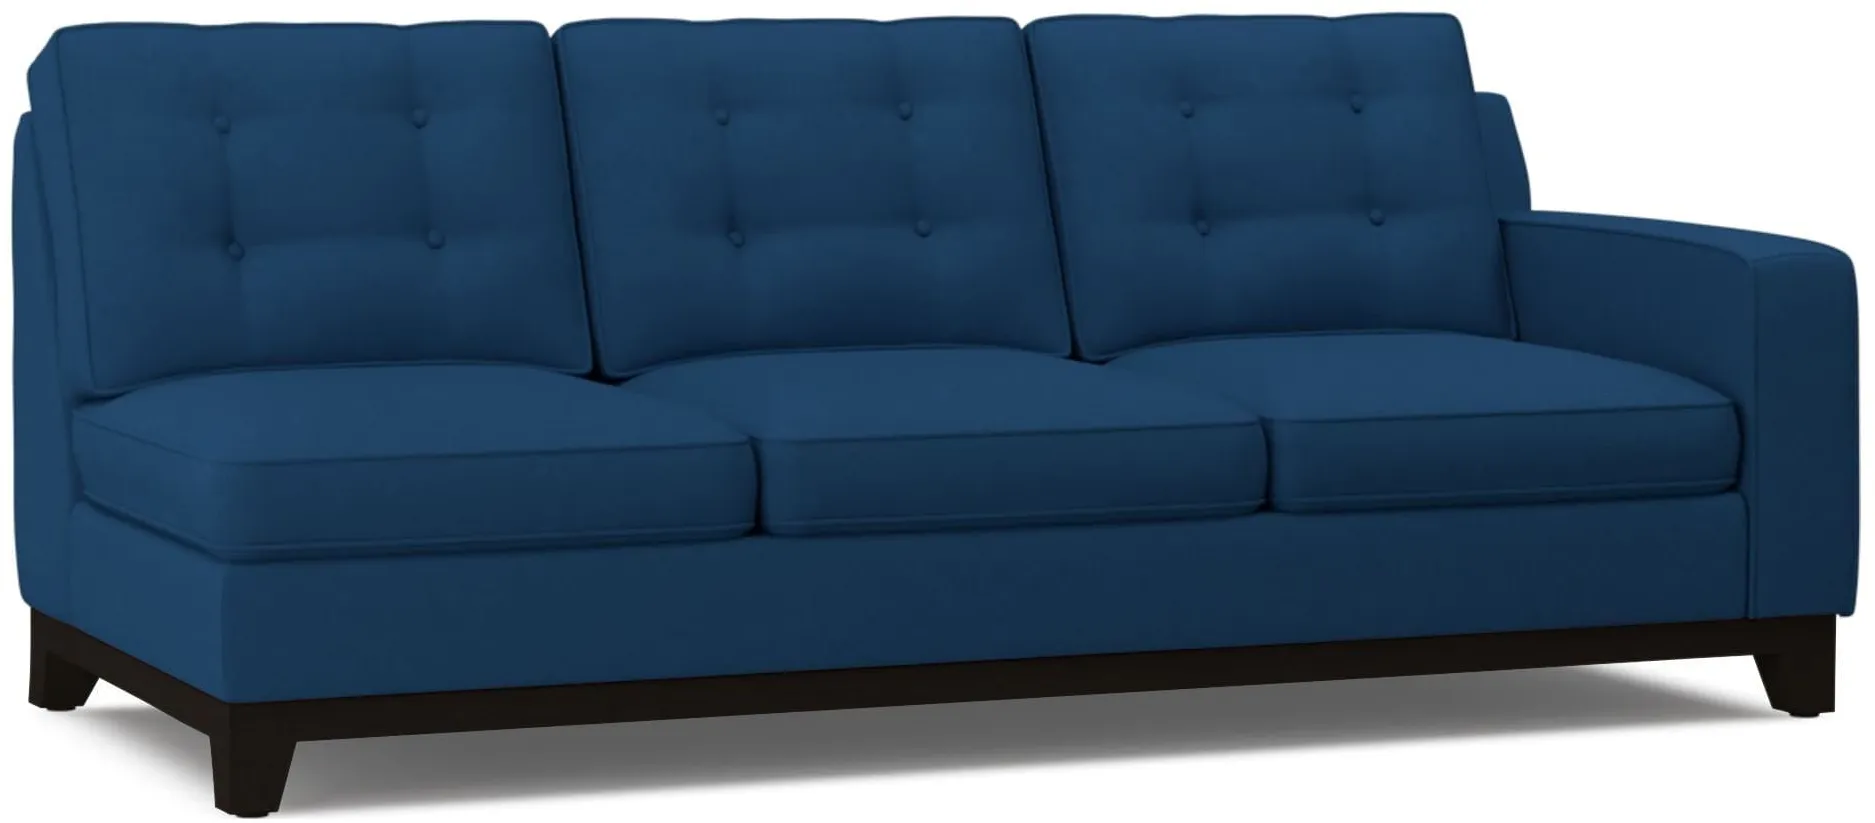 Brentwood Right Arm Sofa